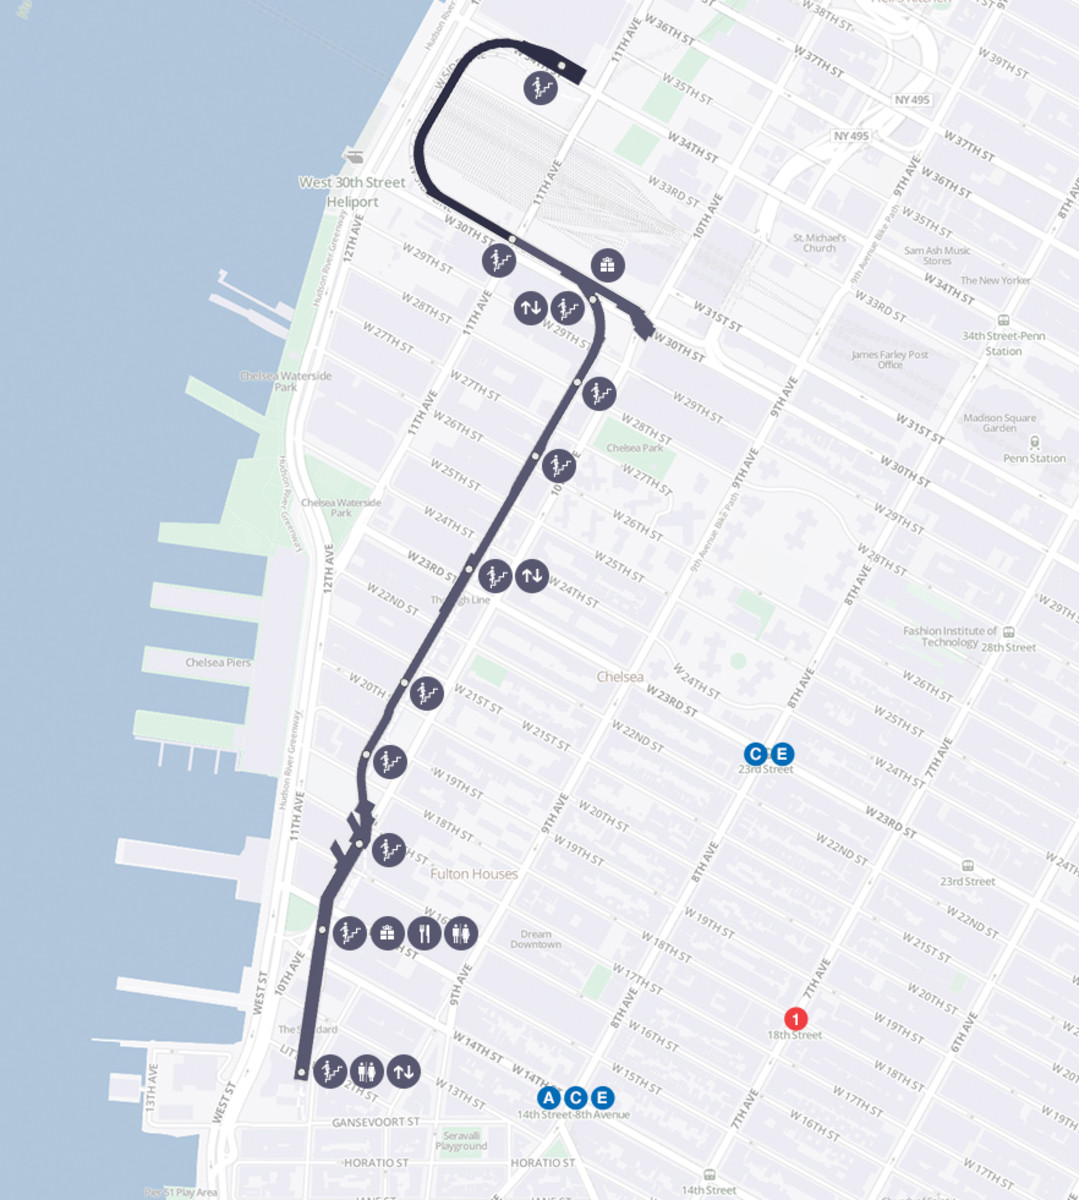 This map shows the northern segment of The High Line Park , which bows west towards the Hudson River, then curves in at 34th Street to a terminus at 11th Avenue